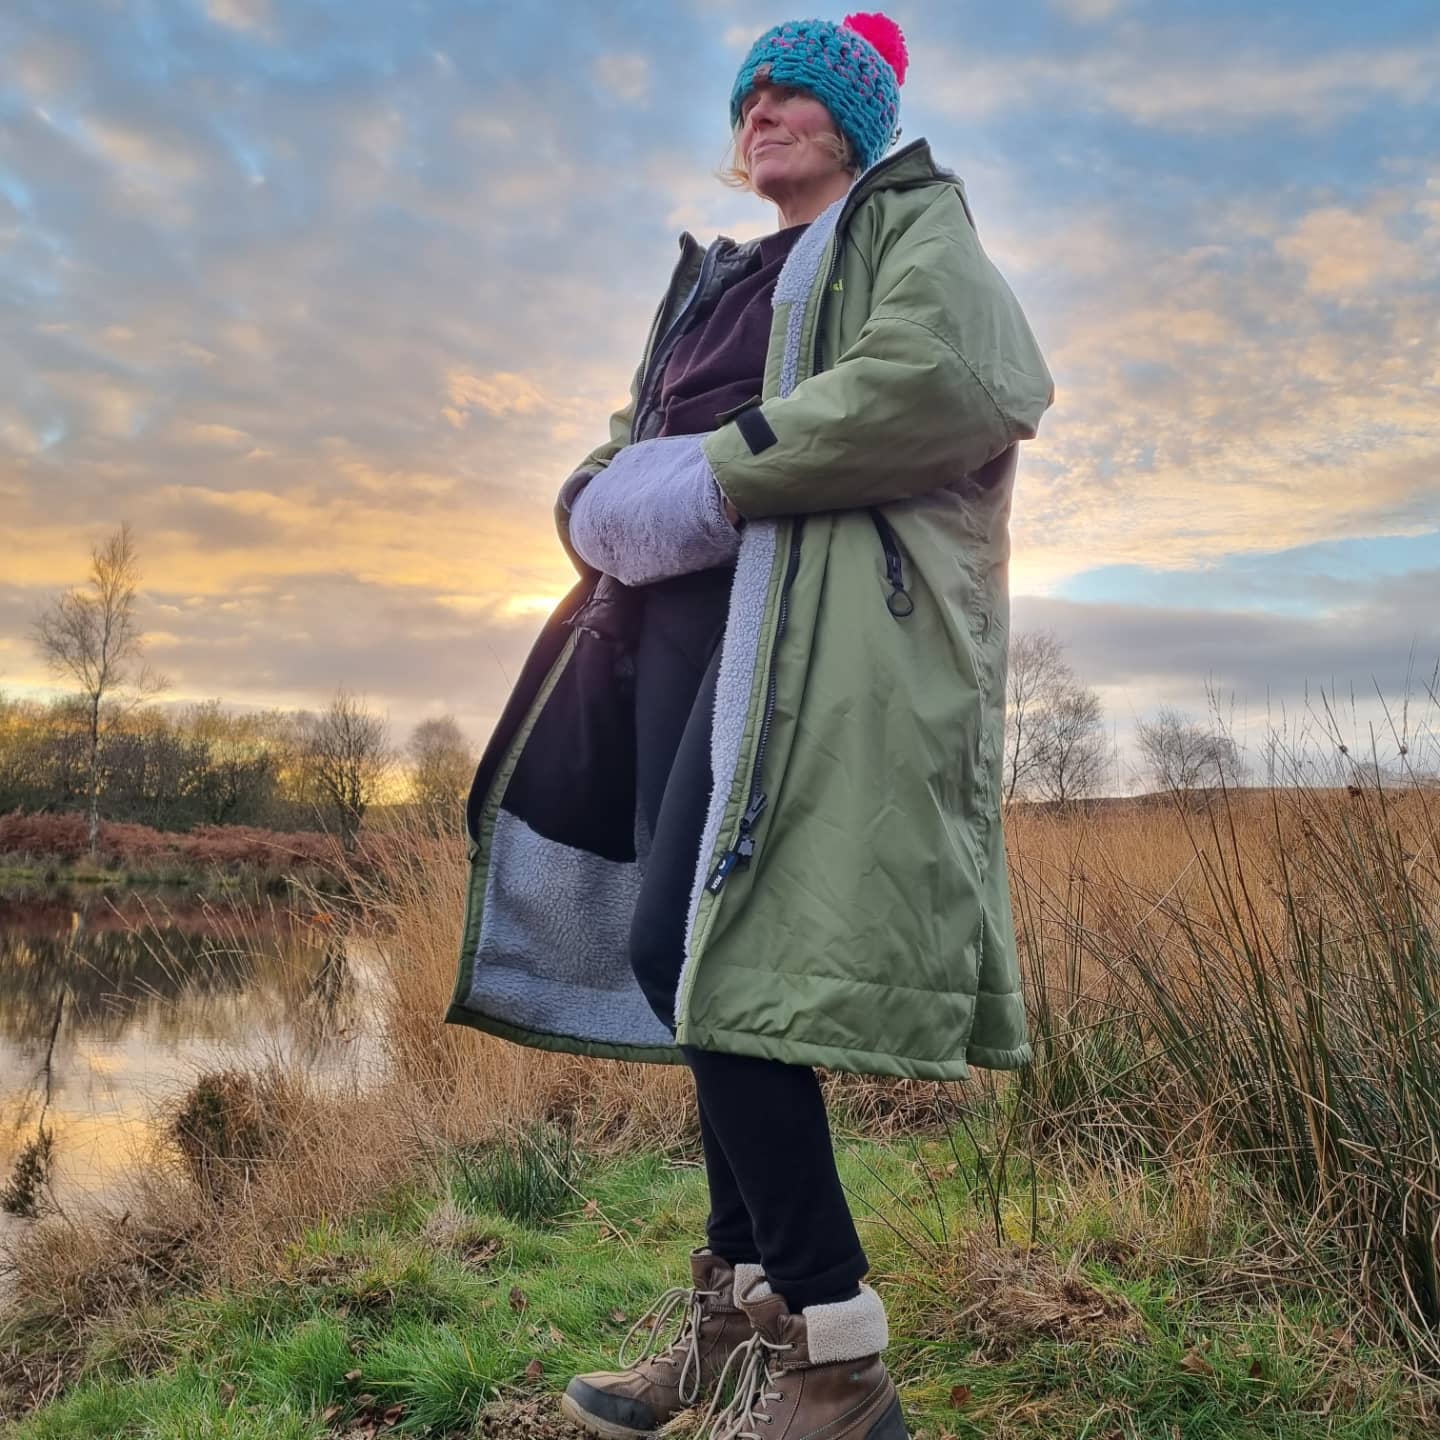 a lady is standing by a lake and the sun is setting in the sky. She is wearing the Hottum core warmer and has her hands warming in it. She is also wearing a khaki Wild Moose changing robe and  a turquoise and pink Big Moose Bobble hat